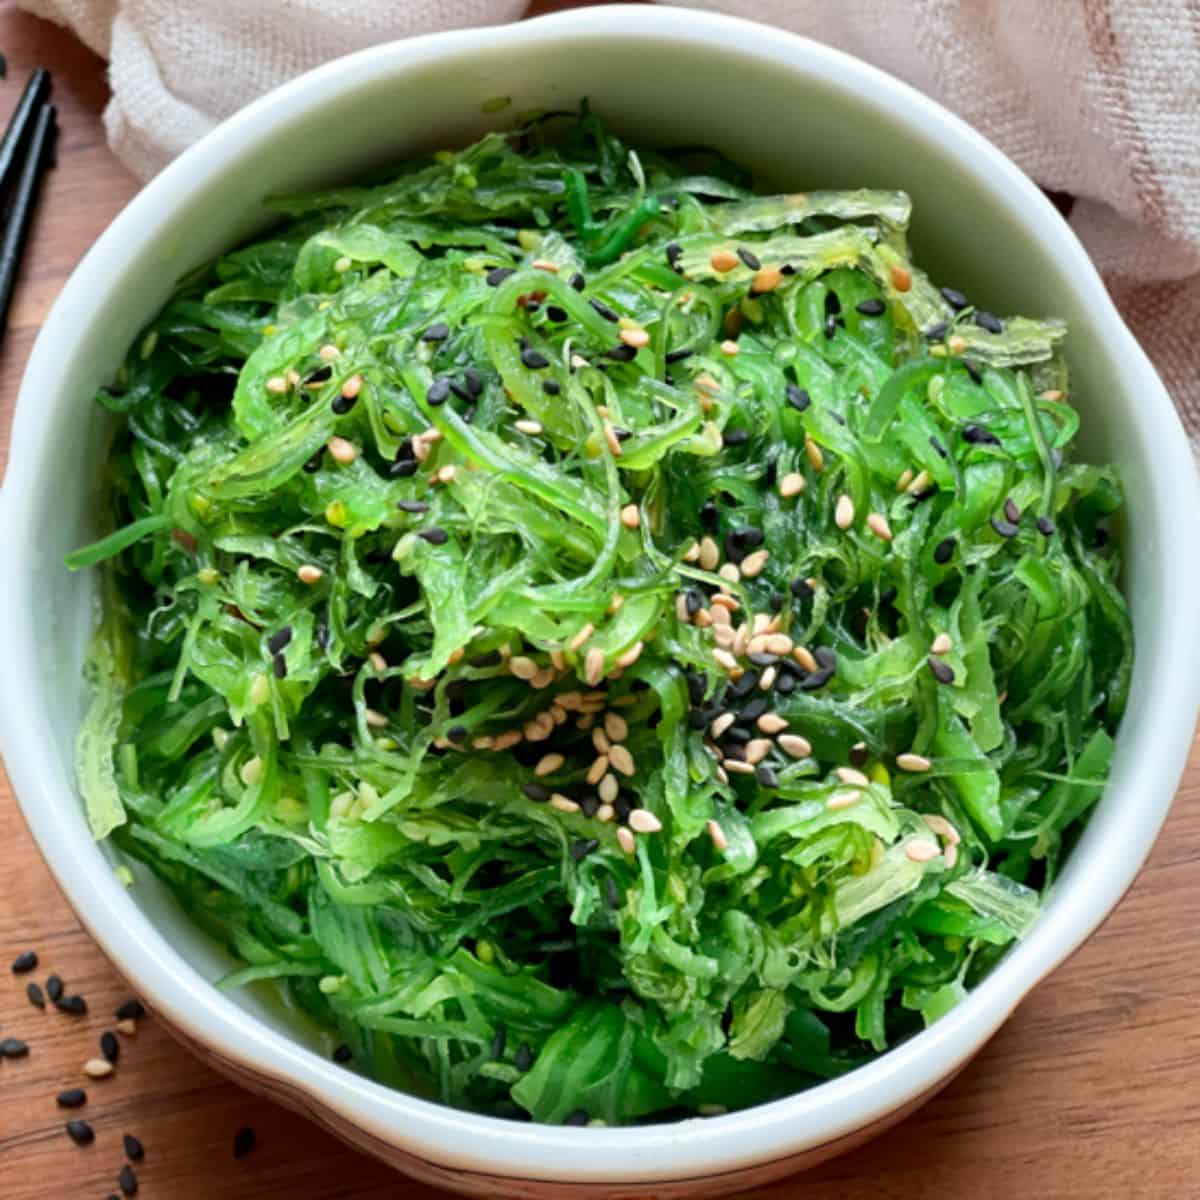 Delicious Japanese Seaweed Salad in a white bowl.